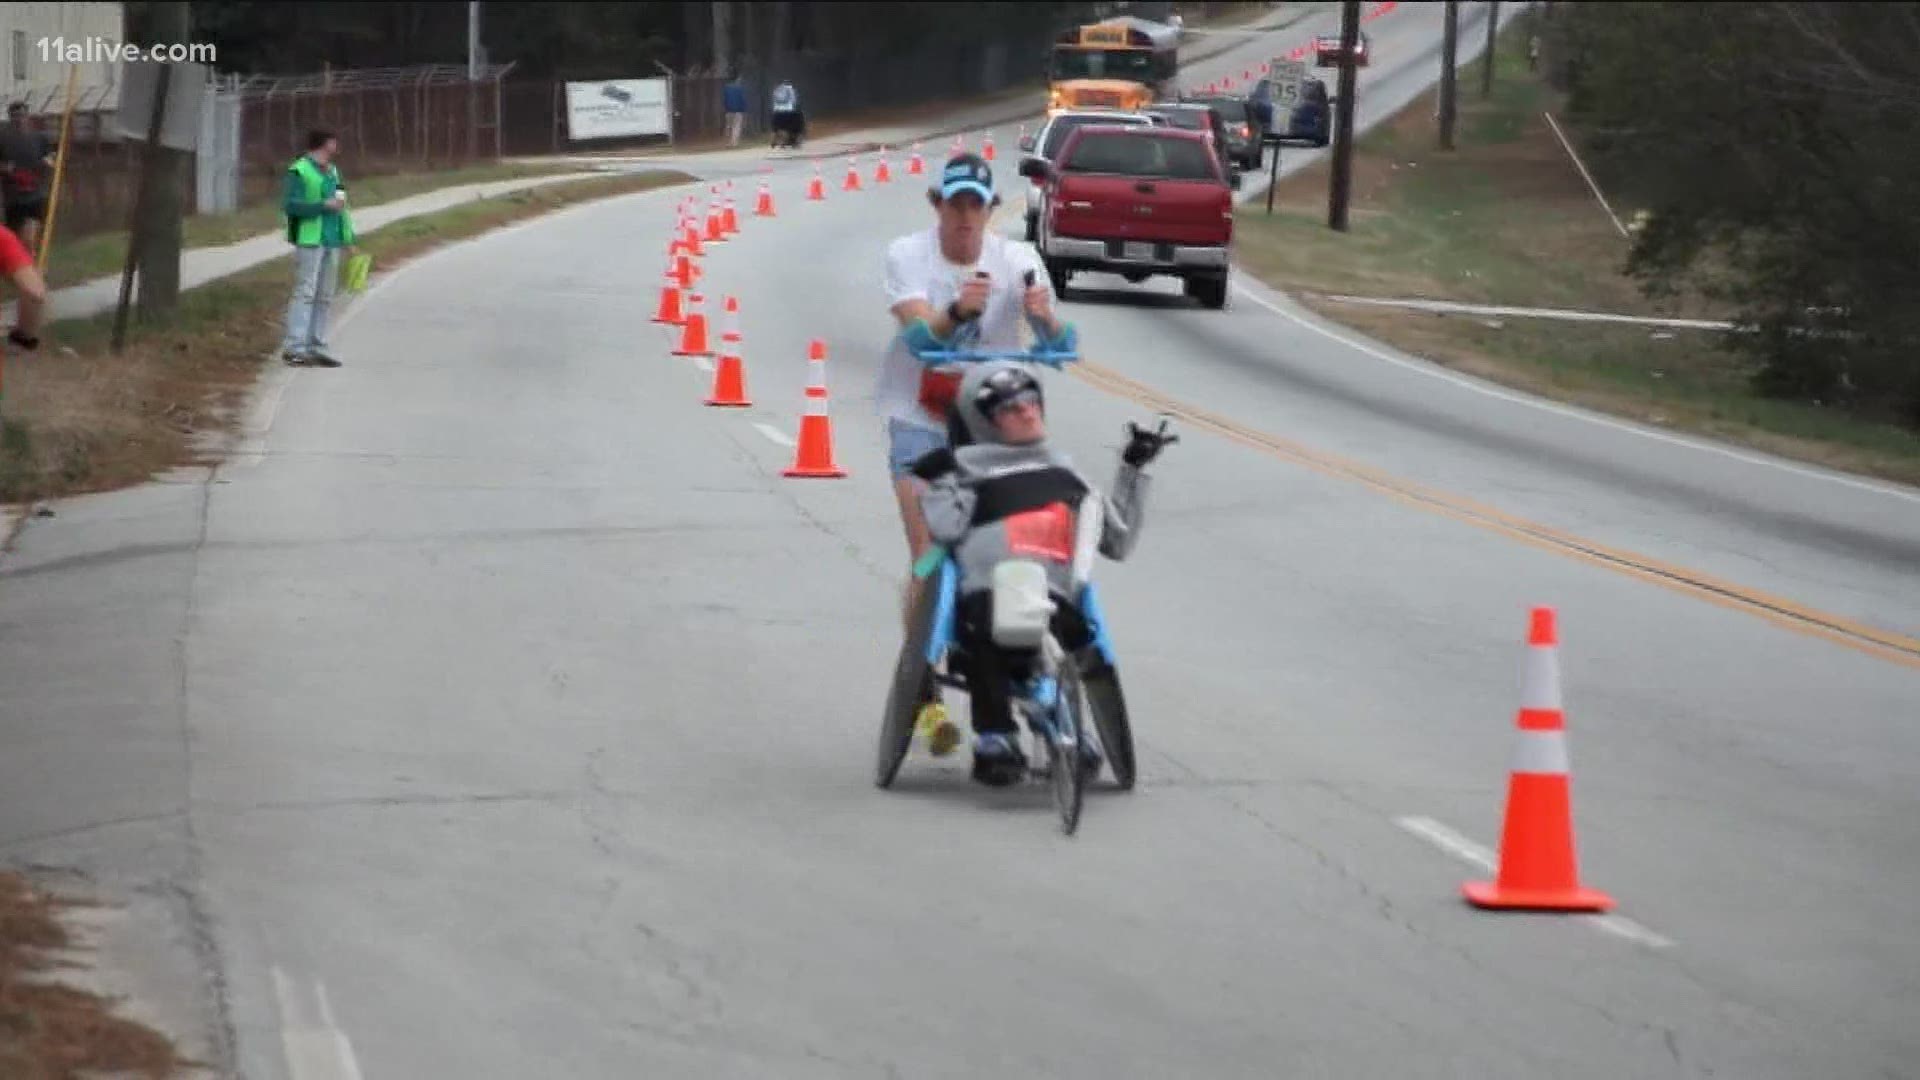 The Kyle Pease Foundation uses virtual race to break boundaries for wheelchair athletes.